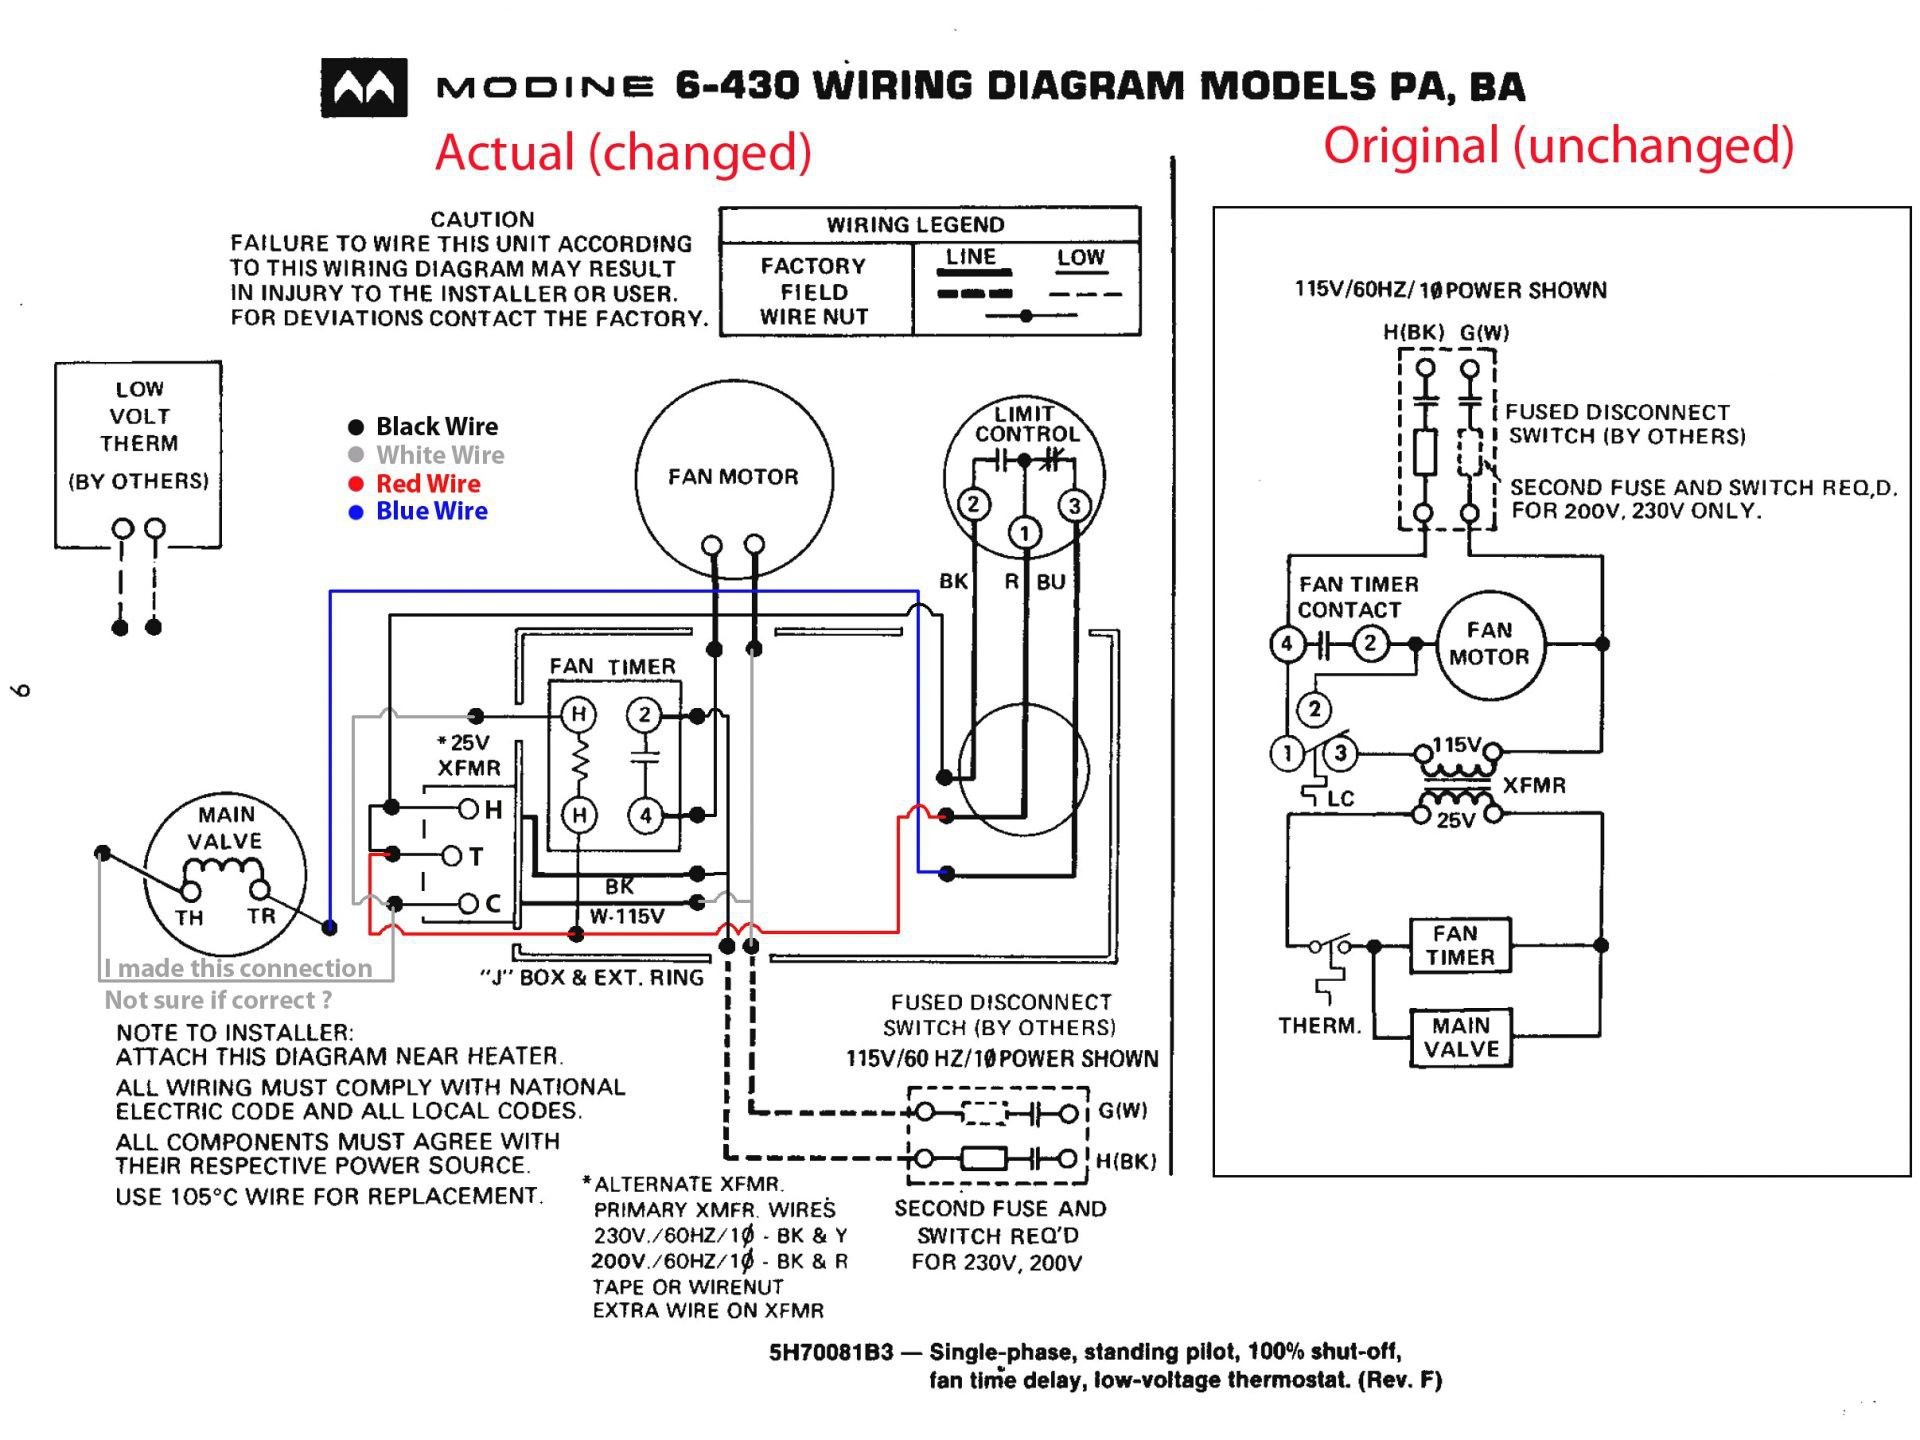 Water Heater Wiring Diagram Dual Element New Delighted Immersion Heater Wiring Diagram Gallery Wiring Diagram